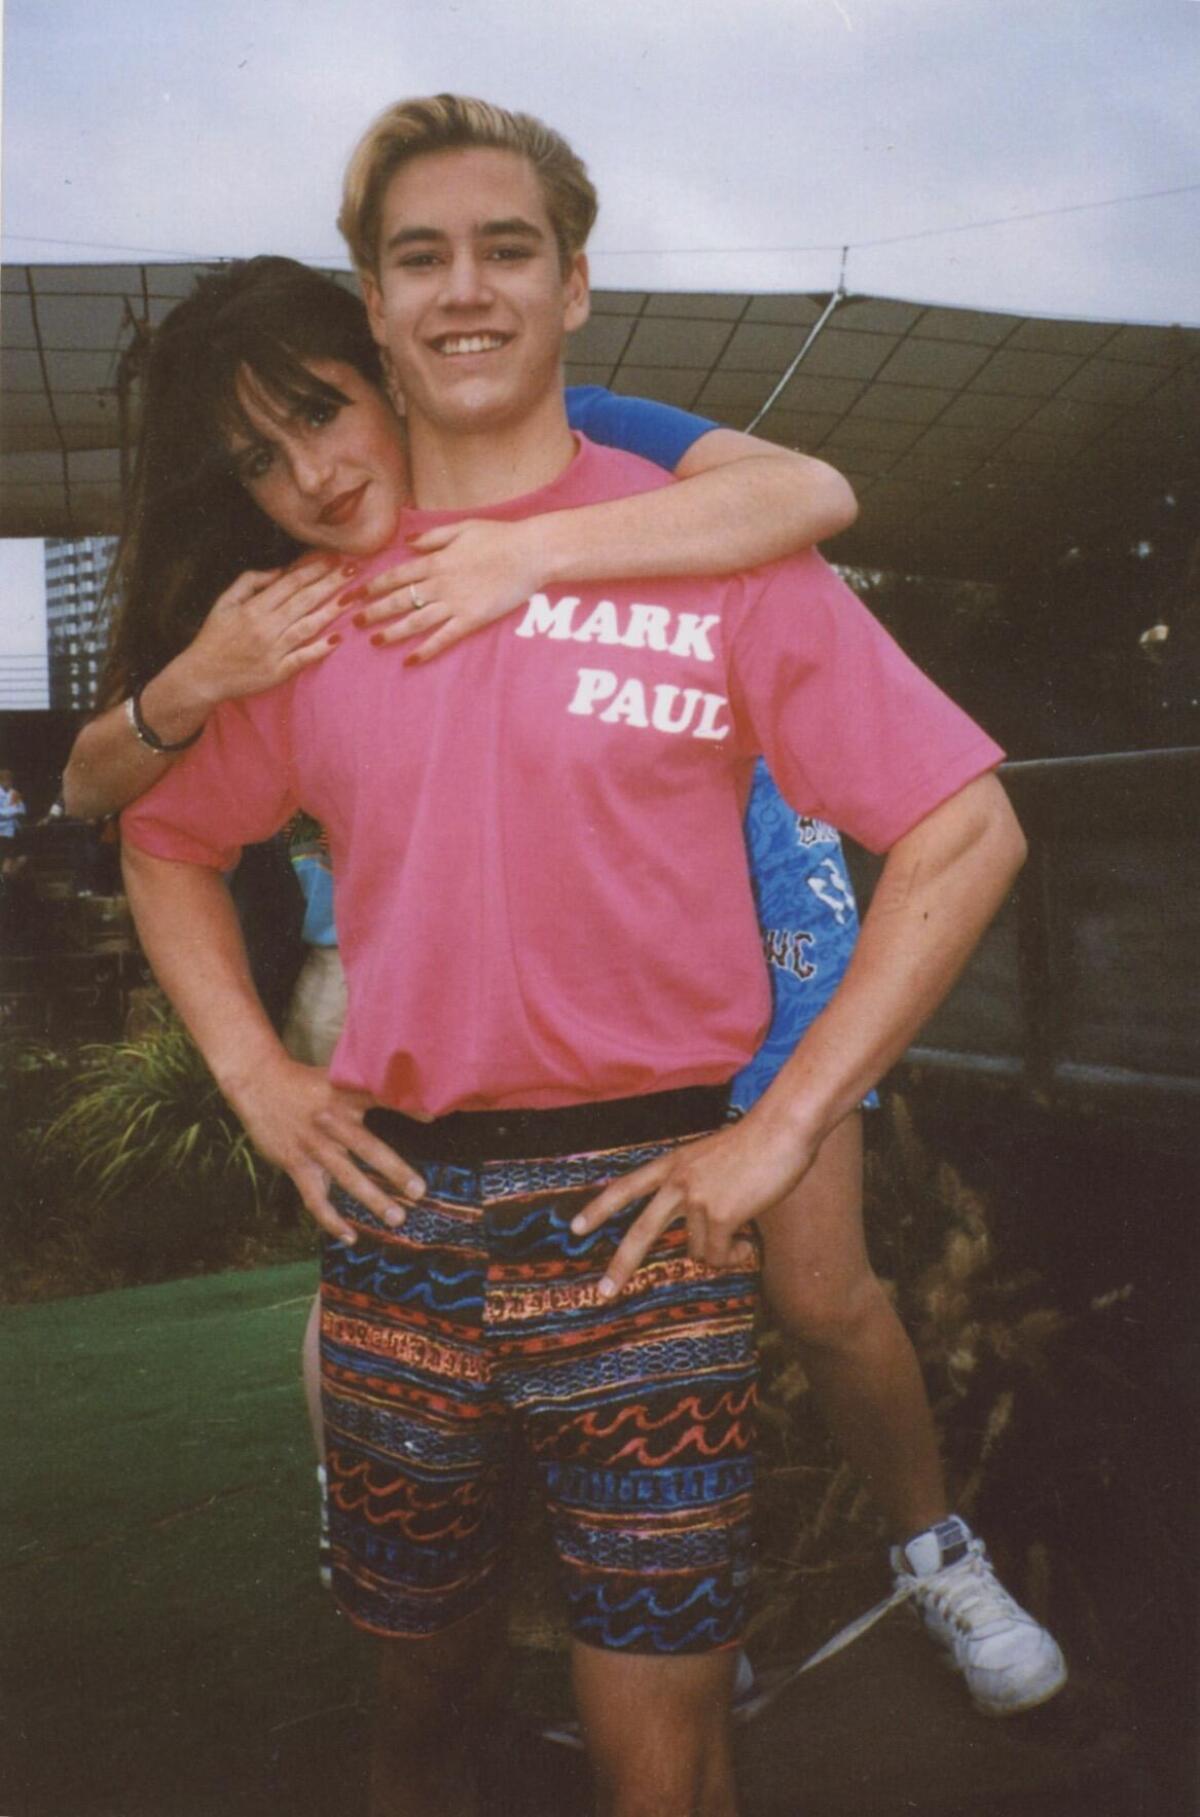 A girl in a blue shirt climbing on the back of a boy in a pink shirt reading Mark Paul